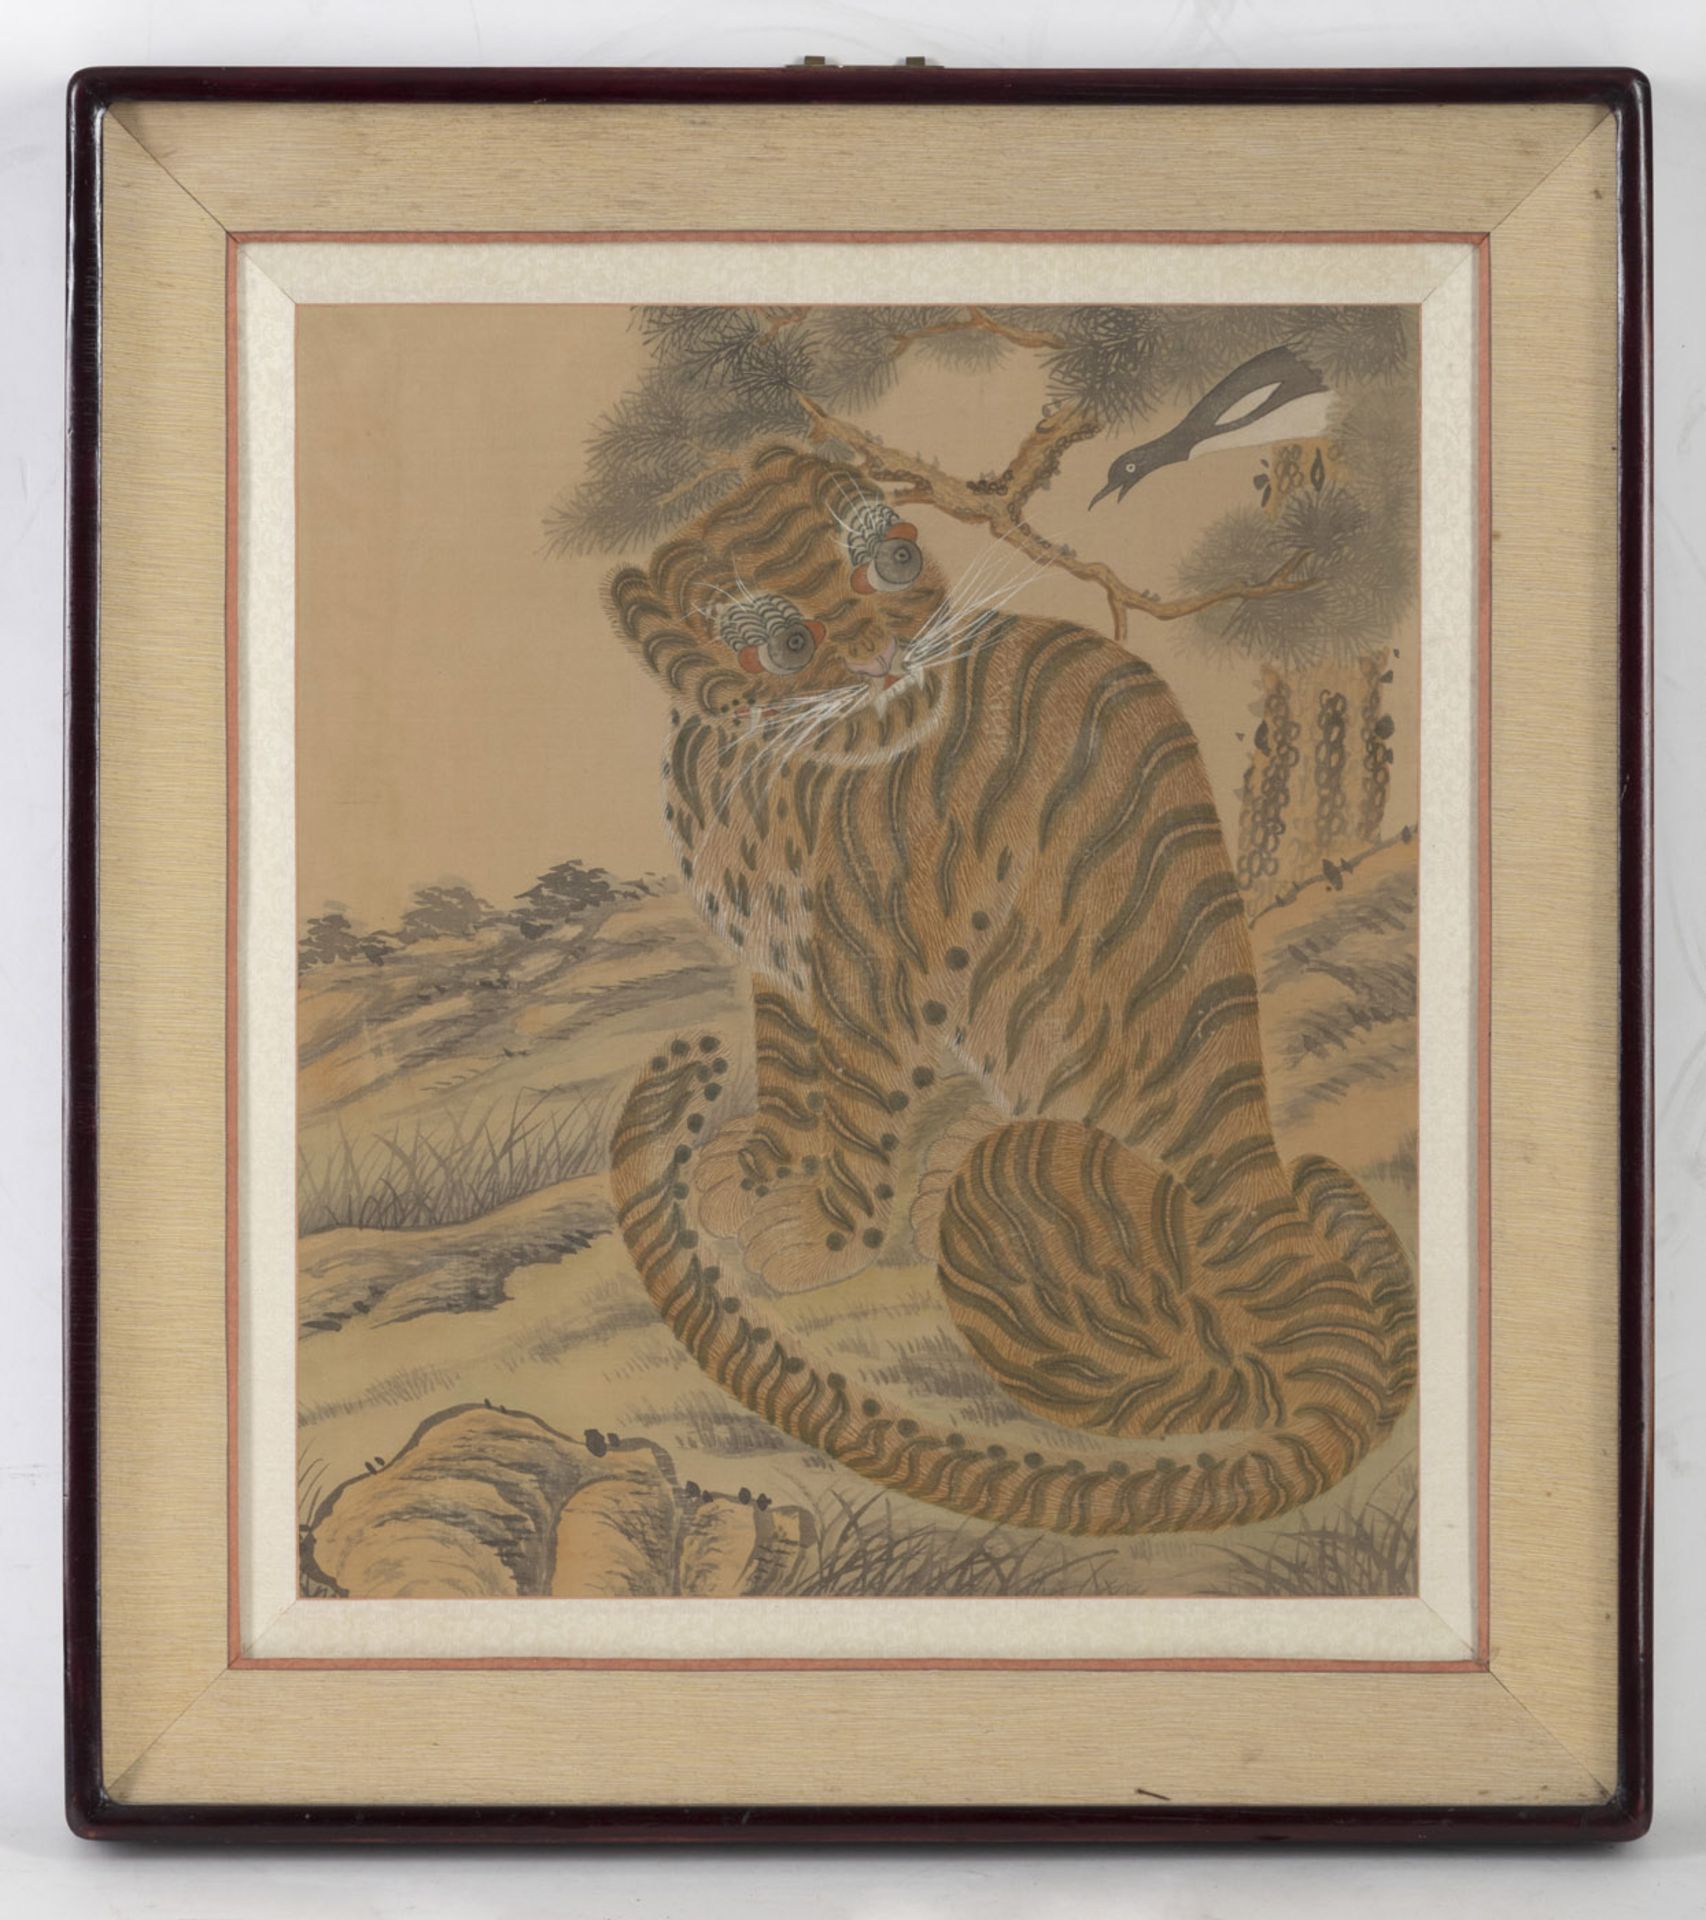 A PAINTING ON PAER DEPICTING A TIGER WITH A MAGPIE - Image 2 of 3